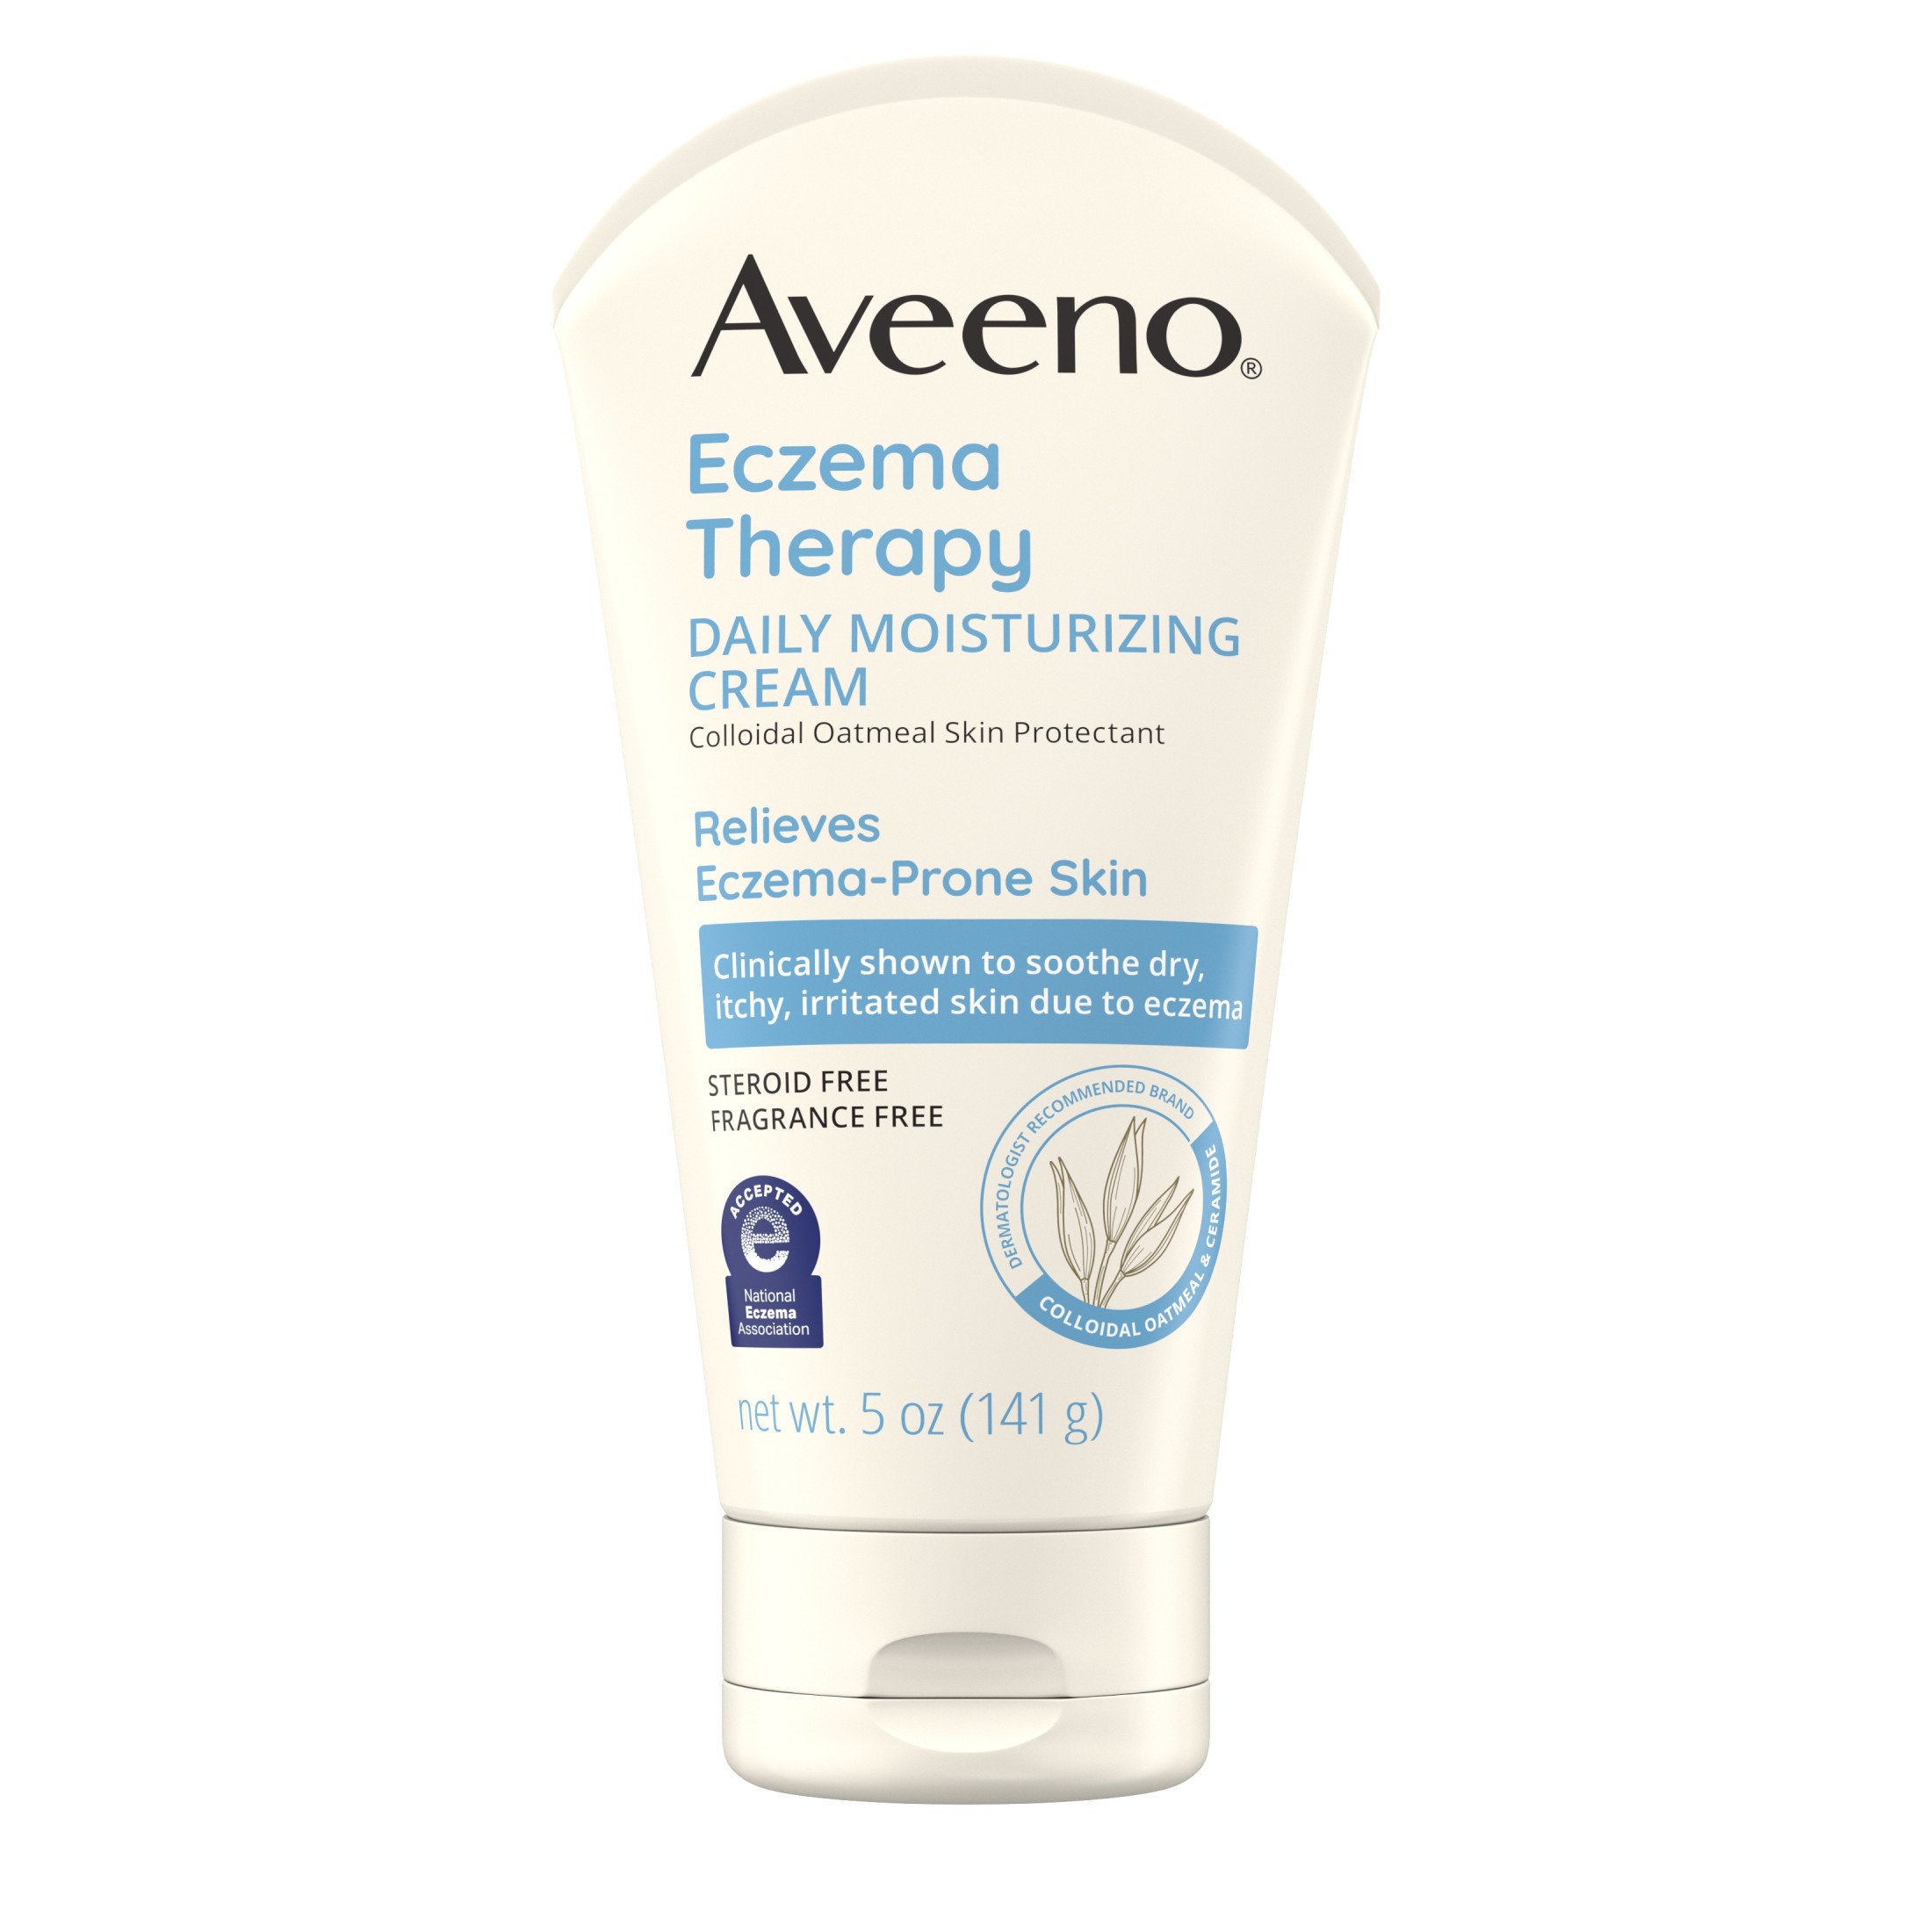 Aveeno Eczema Therapy Daily Soothing Body Cream, Steroid-Free, 5 oz - image 1 of 10